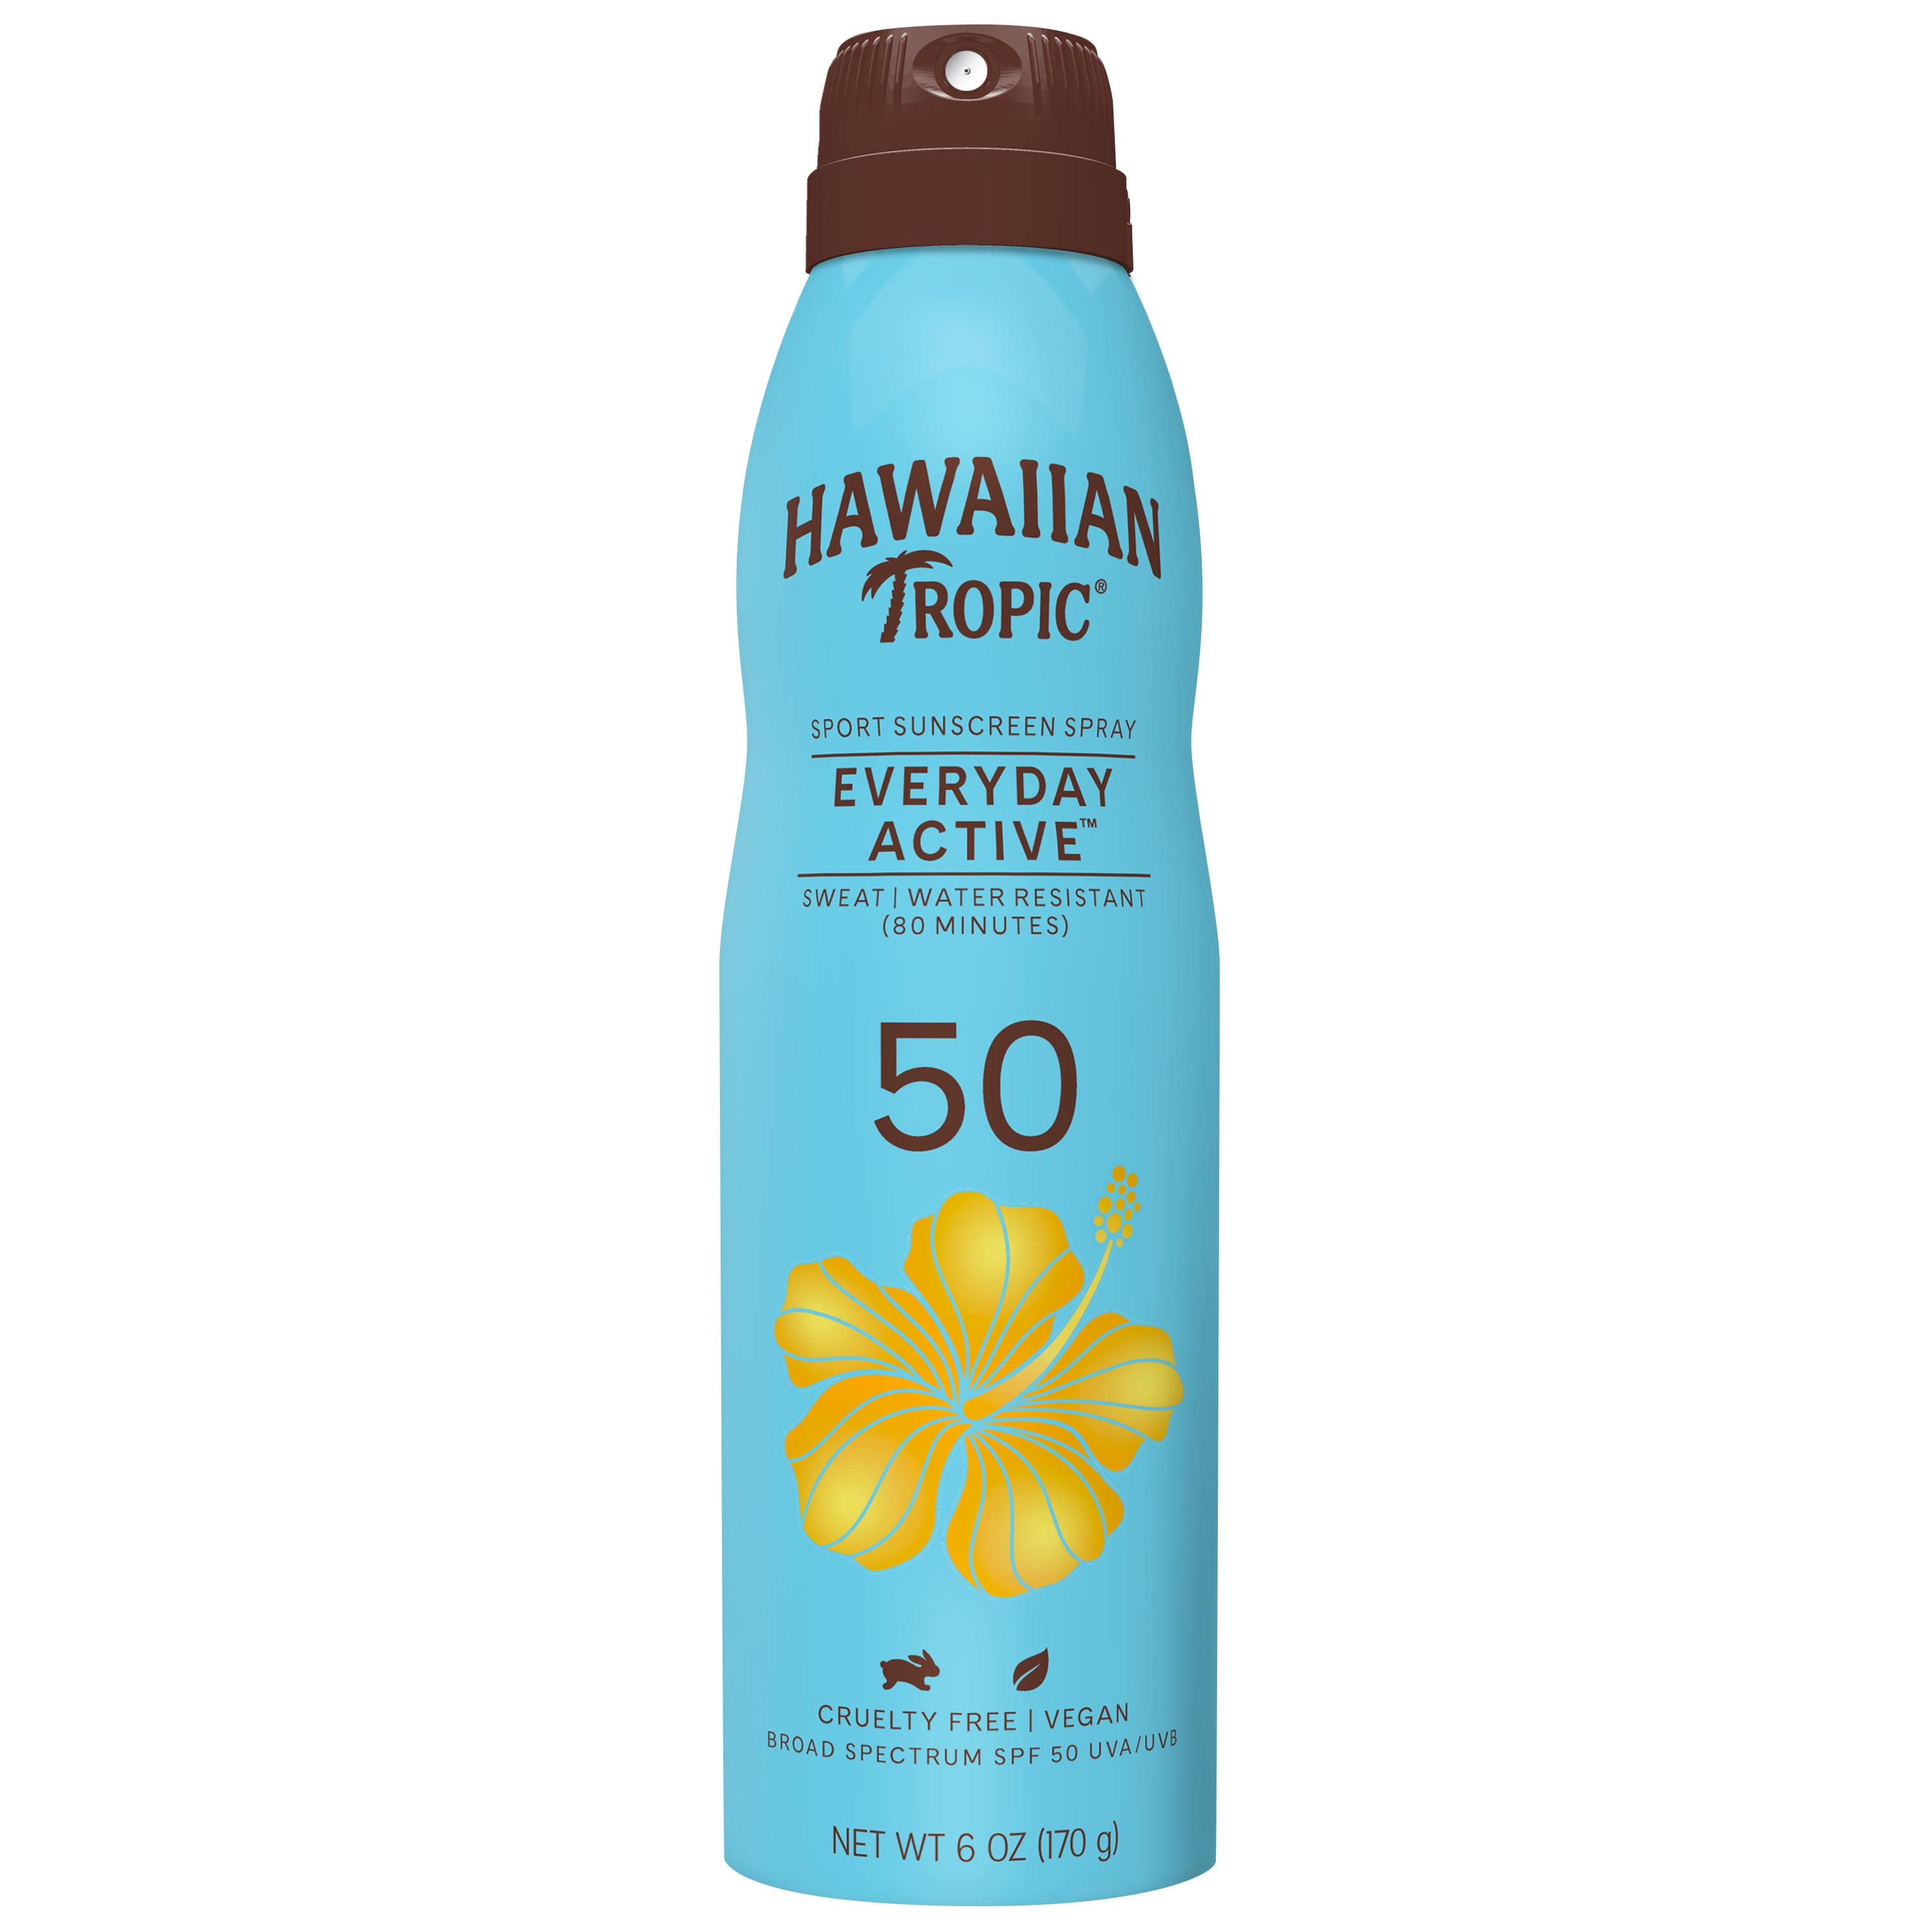 Hawaiian Tropic Everyday Active Clear Spray Sunscreen 6 Oz, SPF 50, Sprays on Clear, Sweat & Water Resistant (80 Minutes) Sunblock